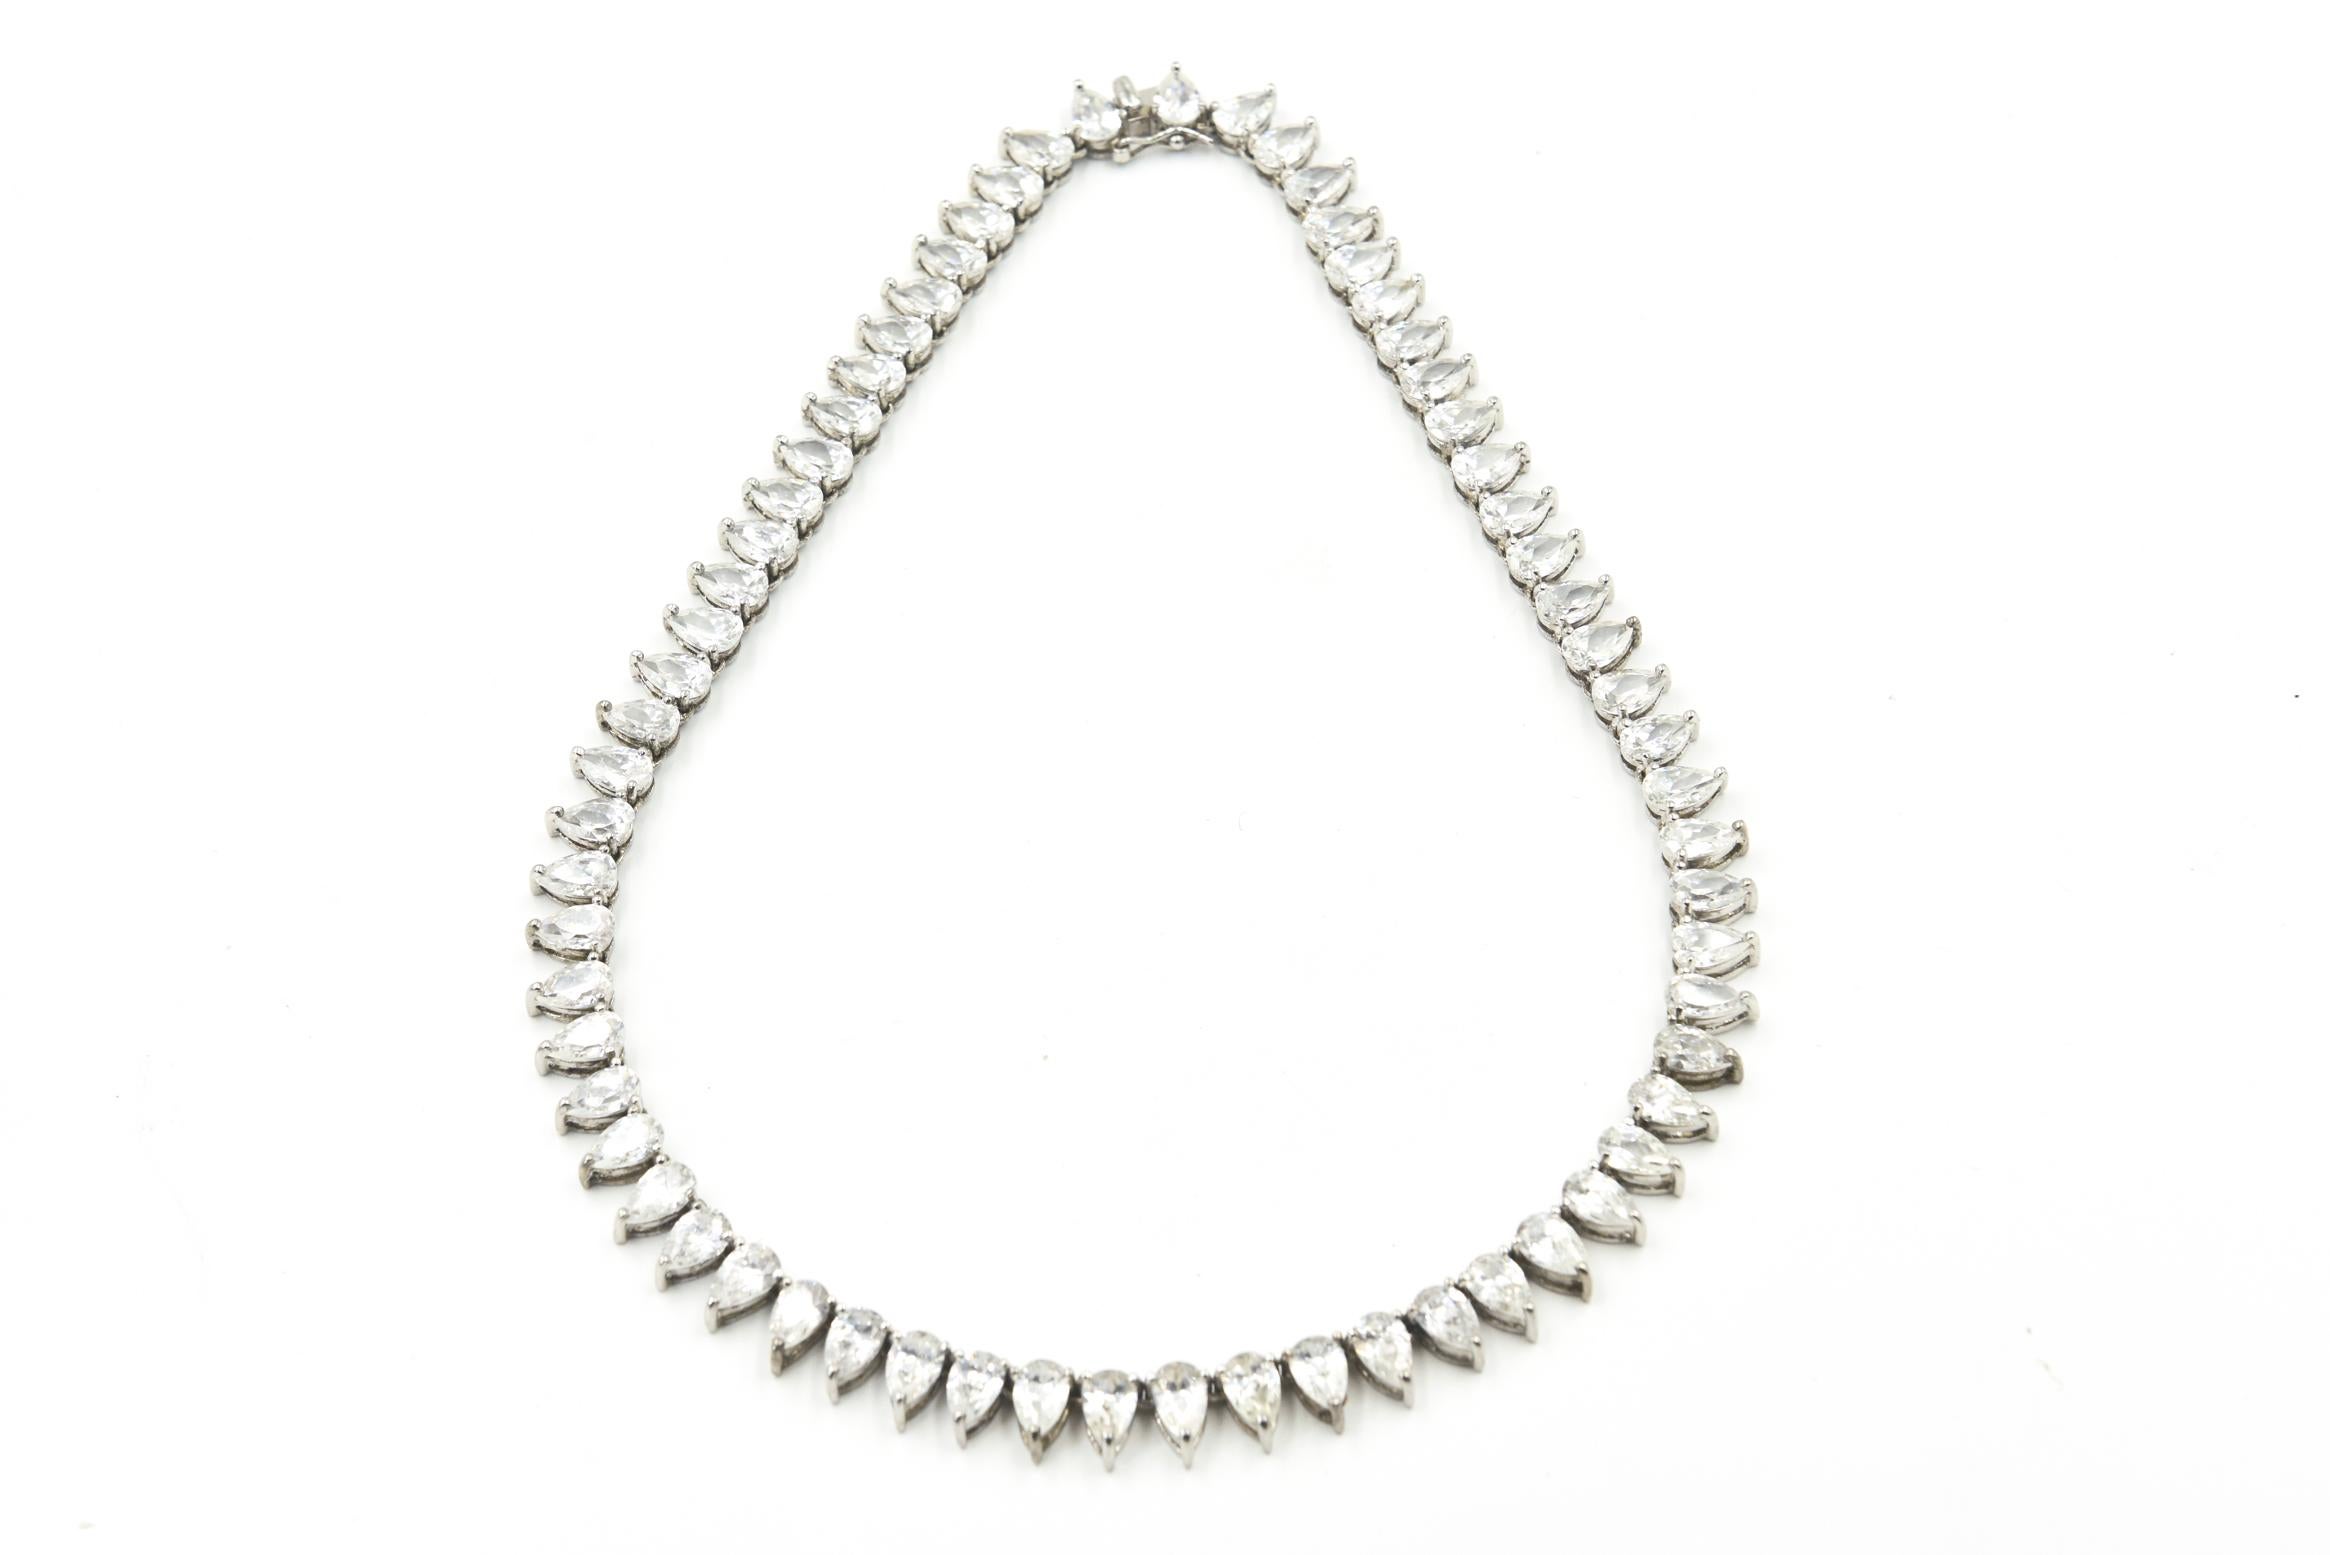 Perfect necklace for a big event it belonged to a socialite who wore at galas where people assumed it was real.  This design is referred to as a line, tennis or riviera style.  It  features 66 pear shaped CZs that look like .70 carat each diamonds. 